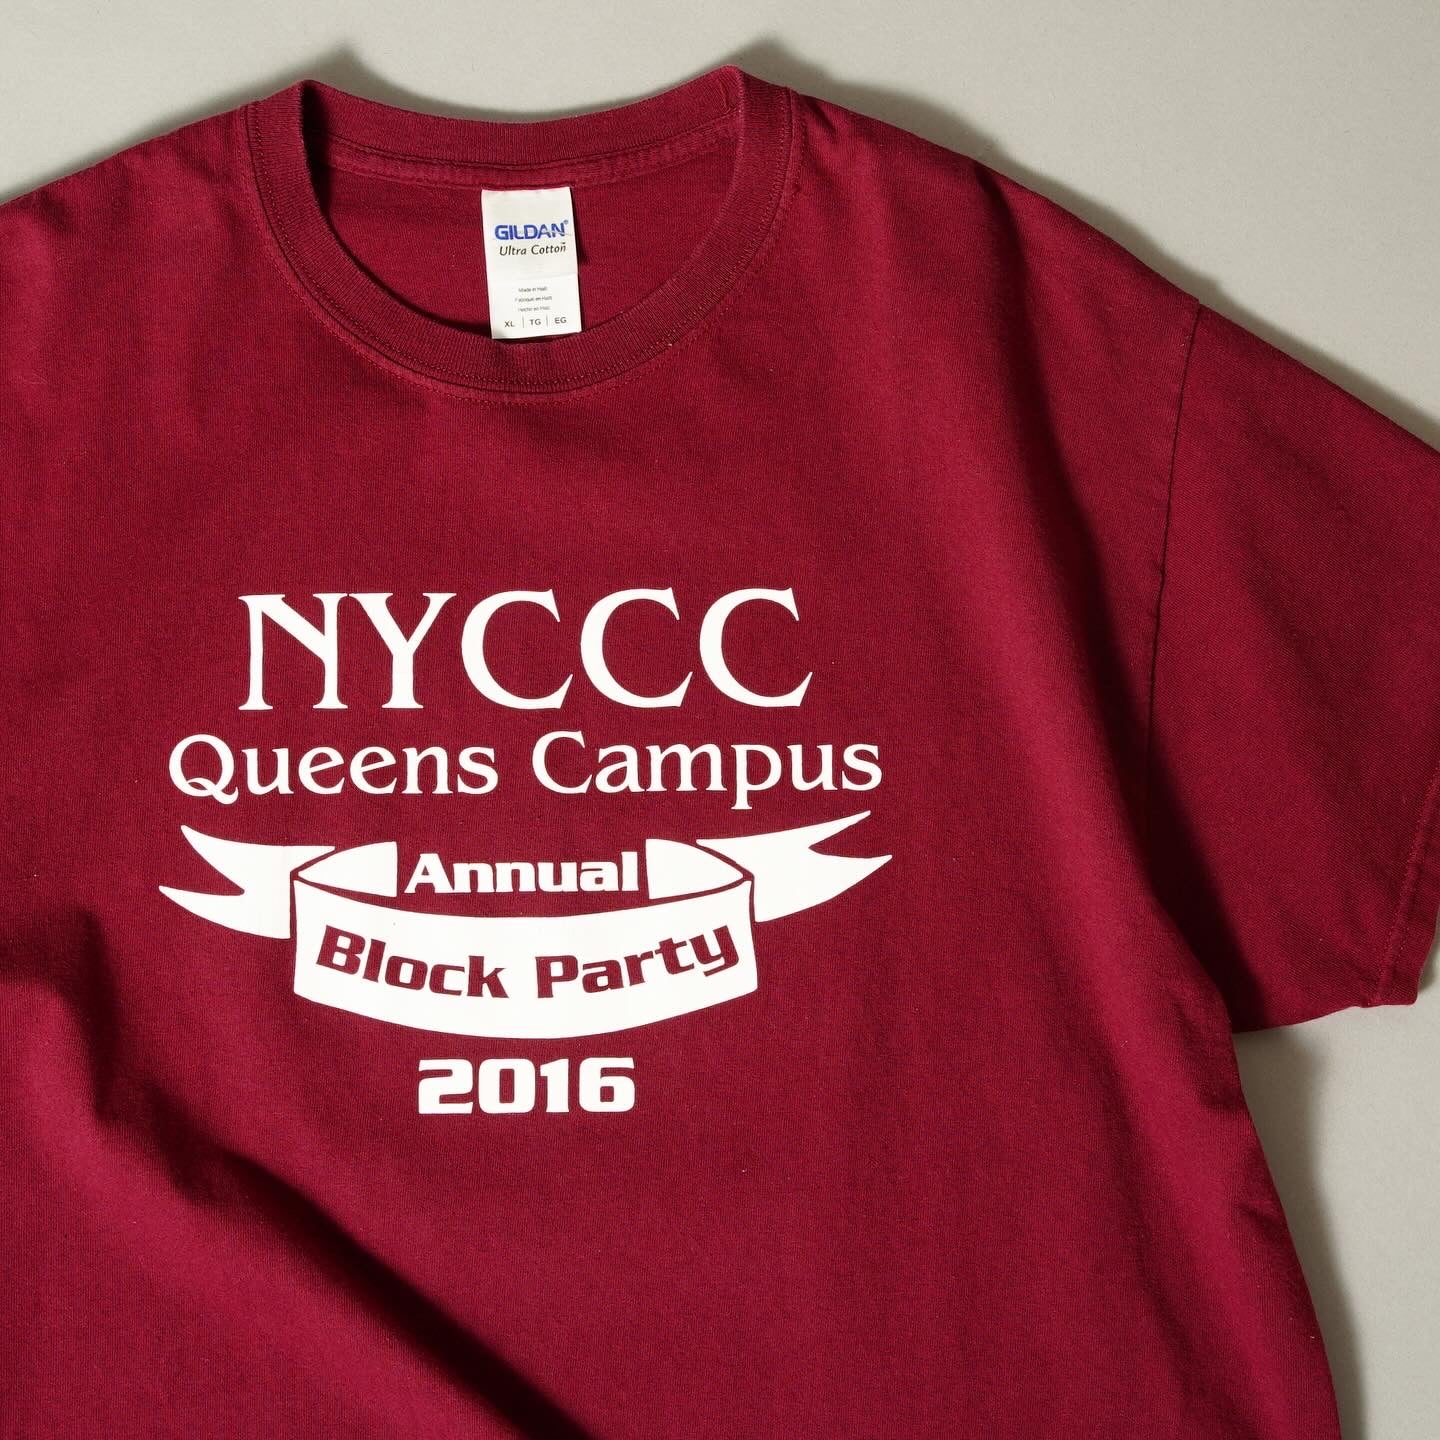 NYCCC "NEW YORK CITY CHILDREN’S CENTER" Block Party Tee